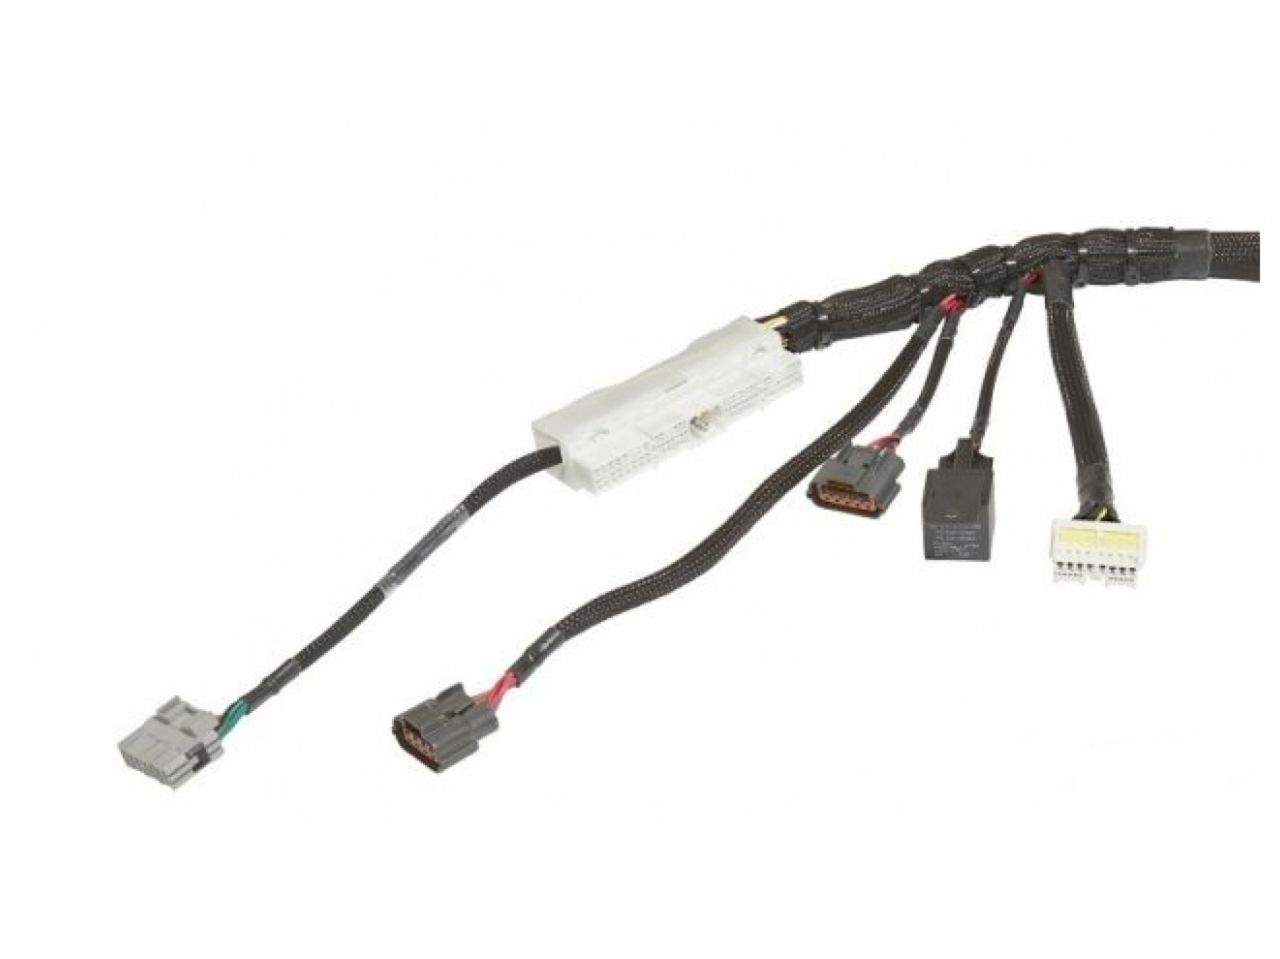 Wiring Specialties S13 SR20DET Wiring Harness for S13 Silvia / 180sx - PRO SERIES